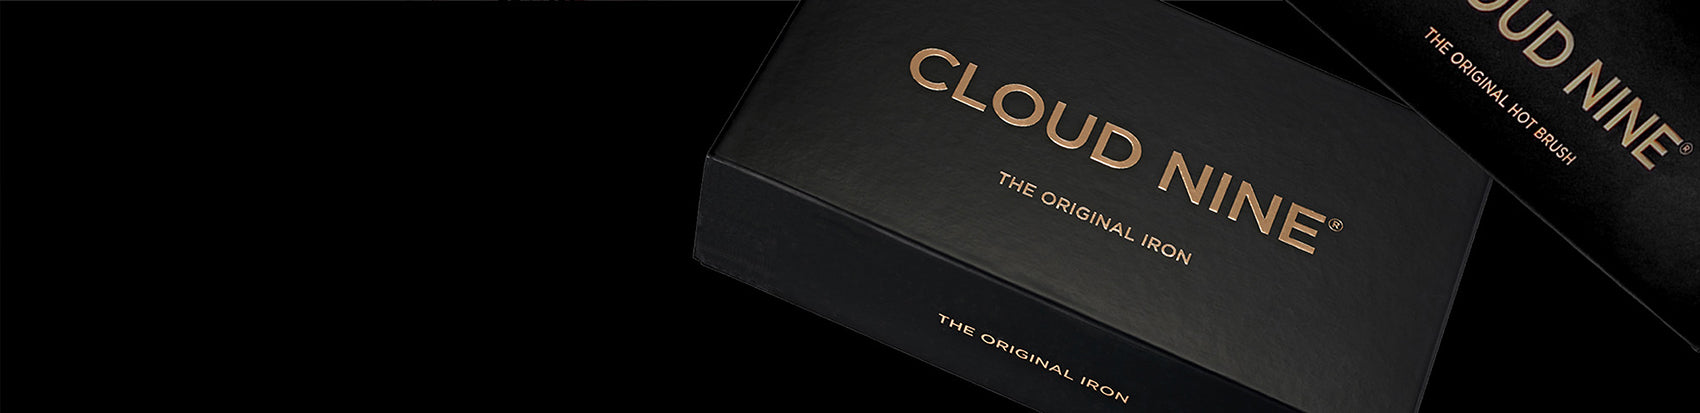 Close up of the CLOUD NINE Original Iron and Hot Brush packaging in black, with a black background. 